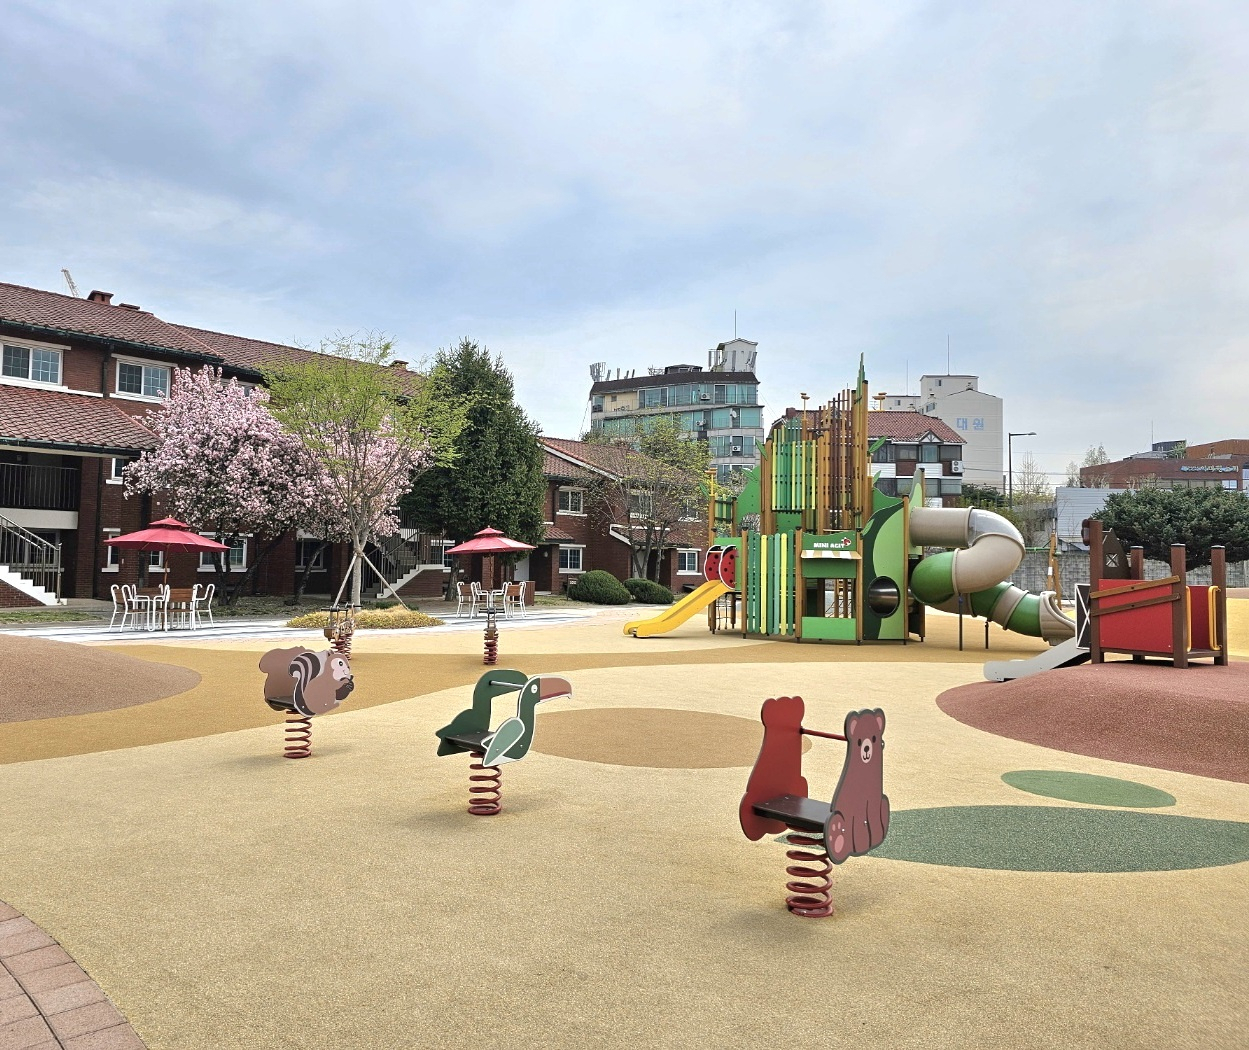 A playground for children with slides and seesaws (Choi Jae-hee / The Korea Herald)